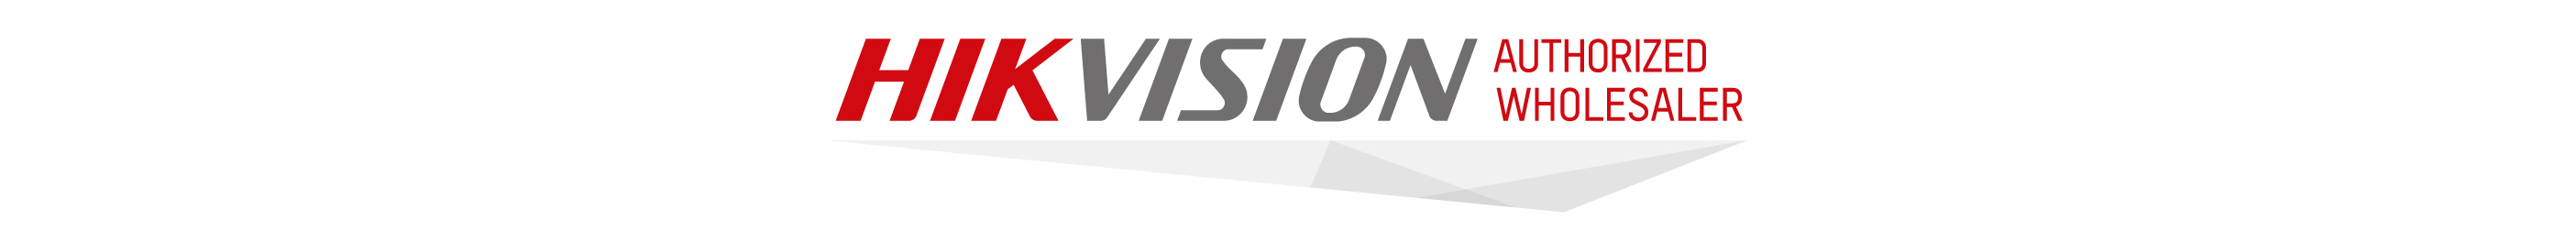 Hikvision Footer